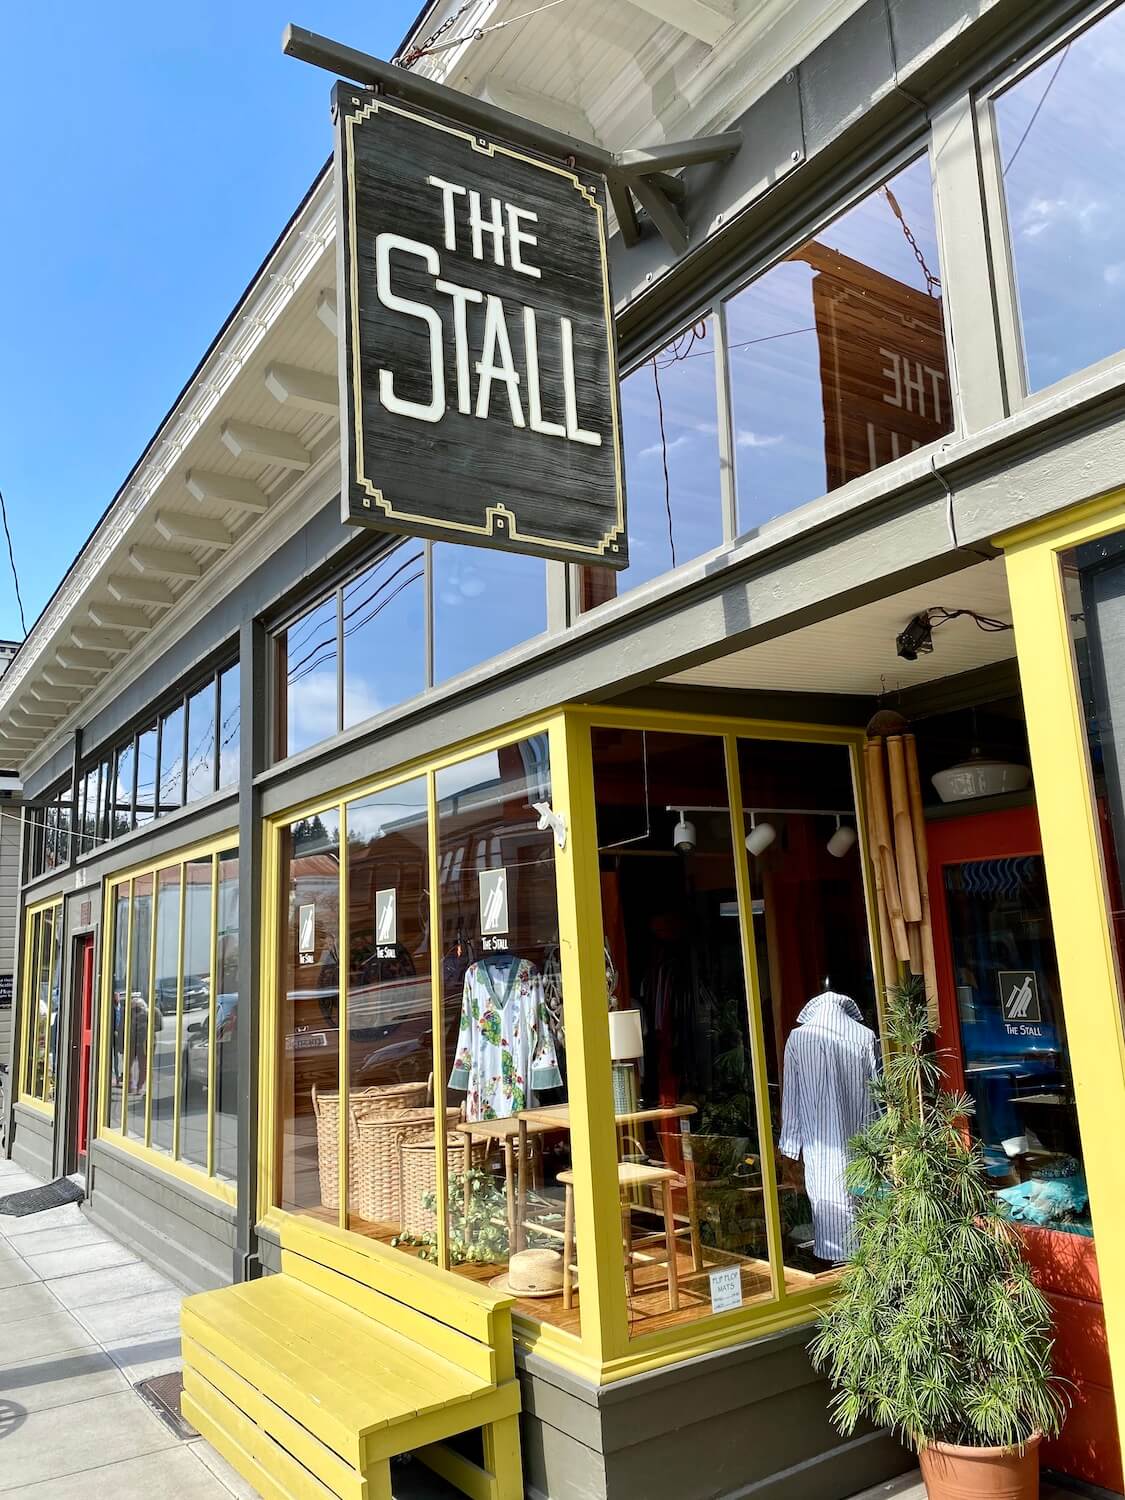 The Stall is a boutique on the Main Street of La Conner, Washington.  The window frames are painted a bright color of yellow and you can see various clothing options inside the window. There is also a yellow bench on the sidewalk leaned up against the windows of the shop.